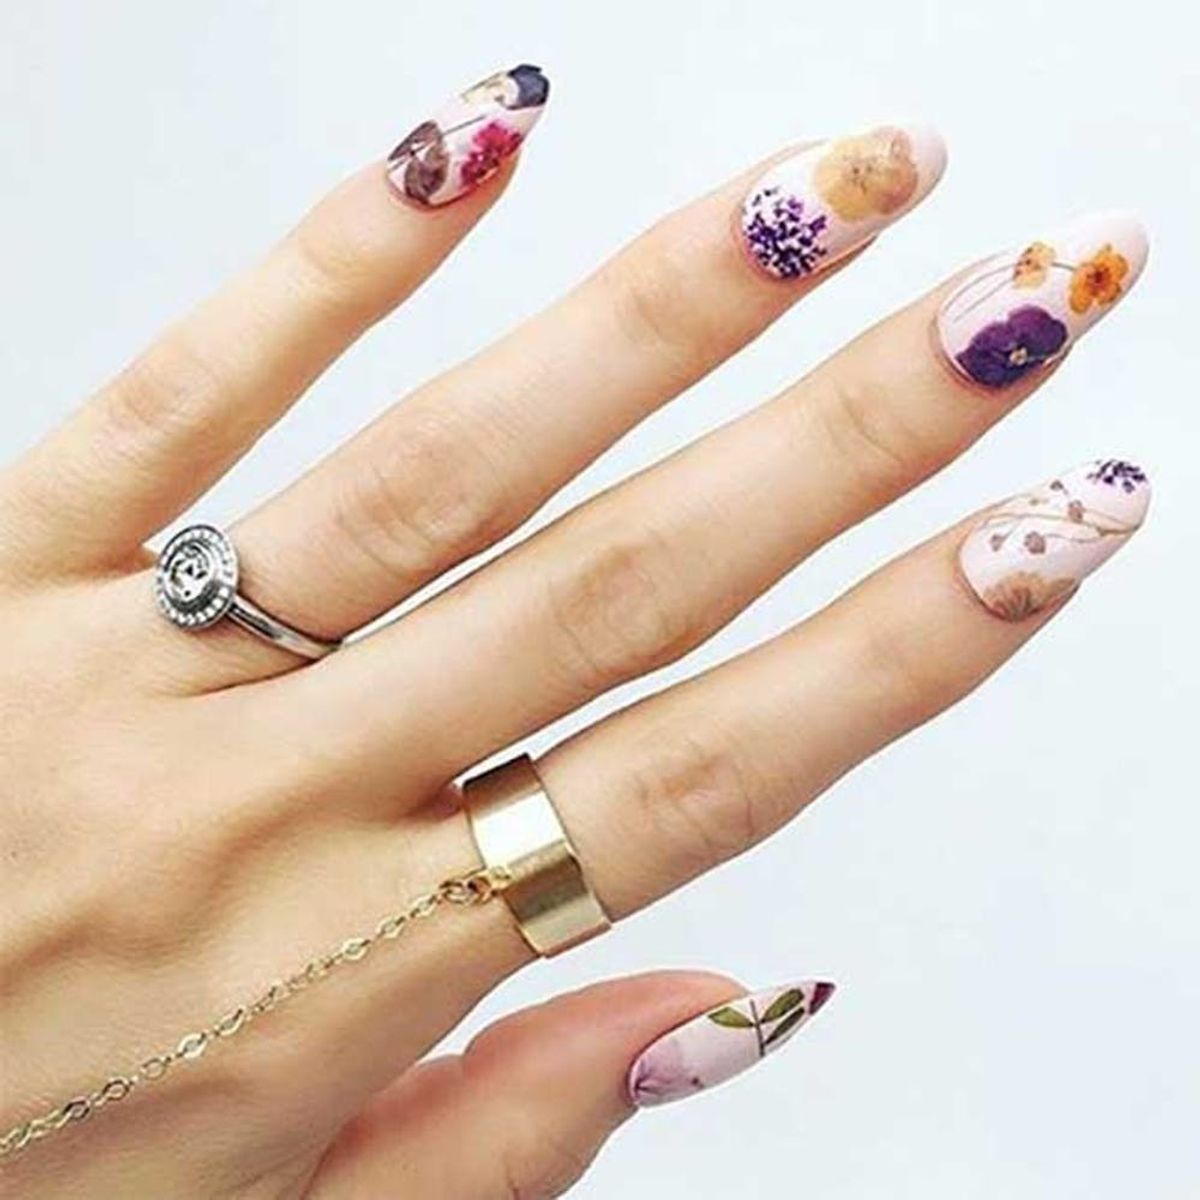 11 Pressed Flower Manicures That Will Become Your Spring Obsession